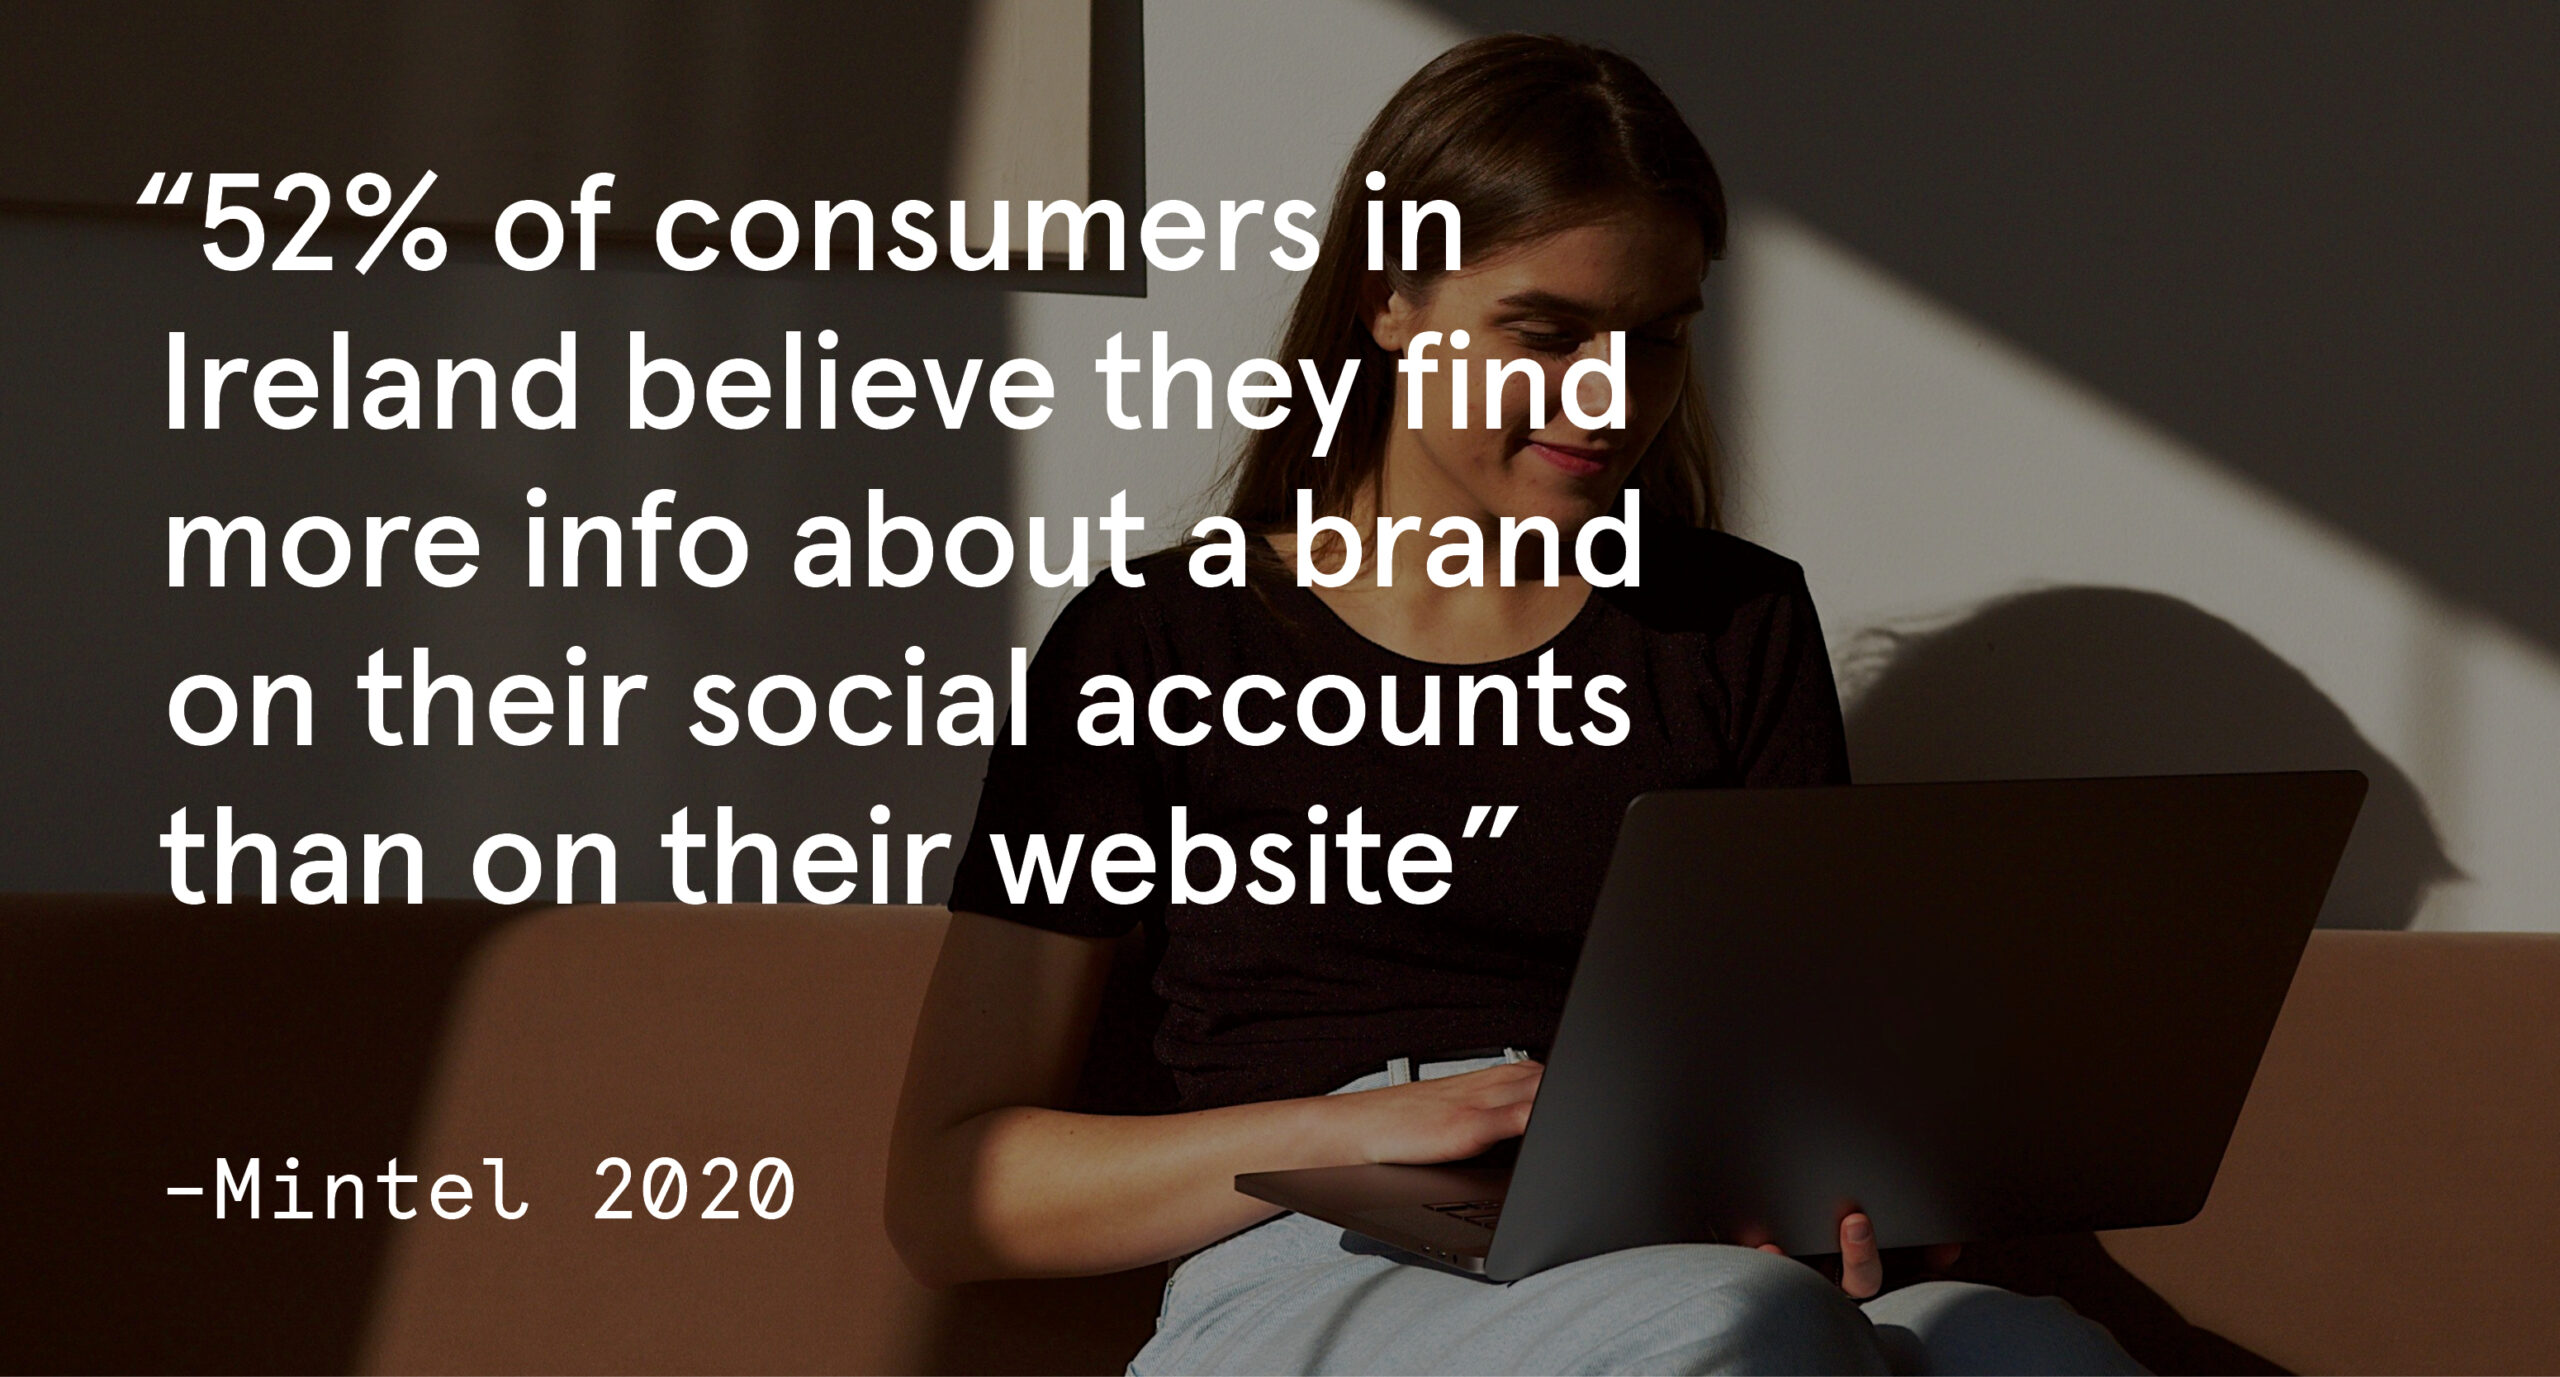 Consumers find more information about brands on their social media than on their website. 